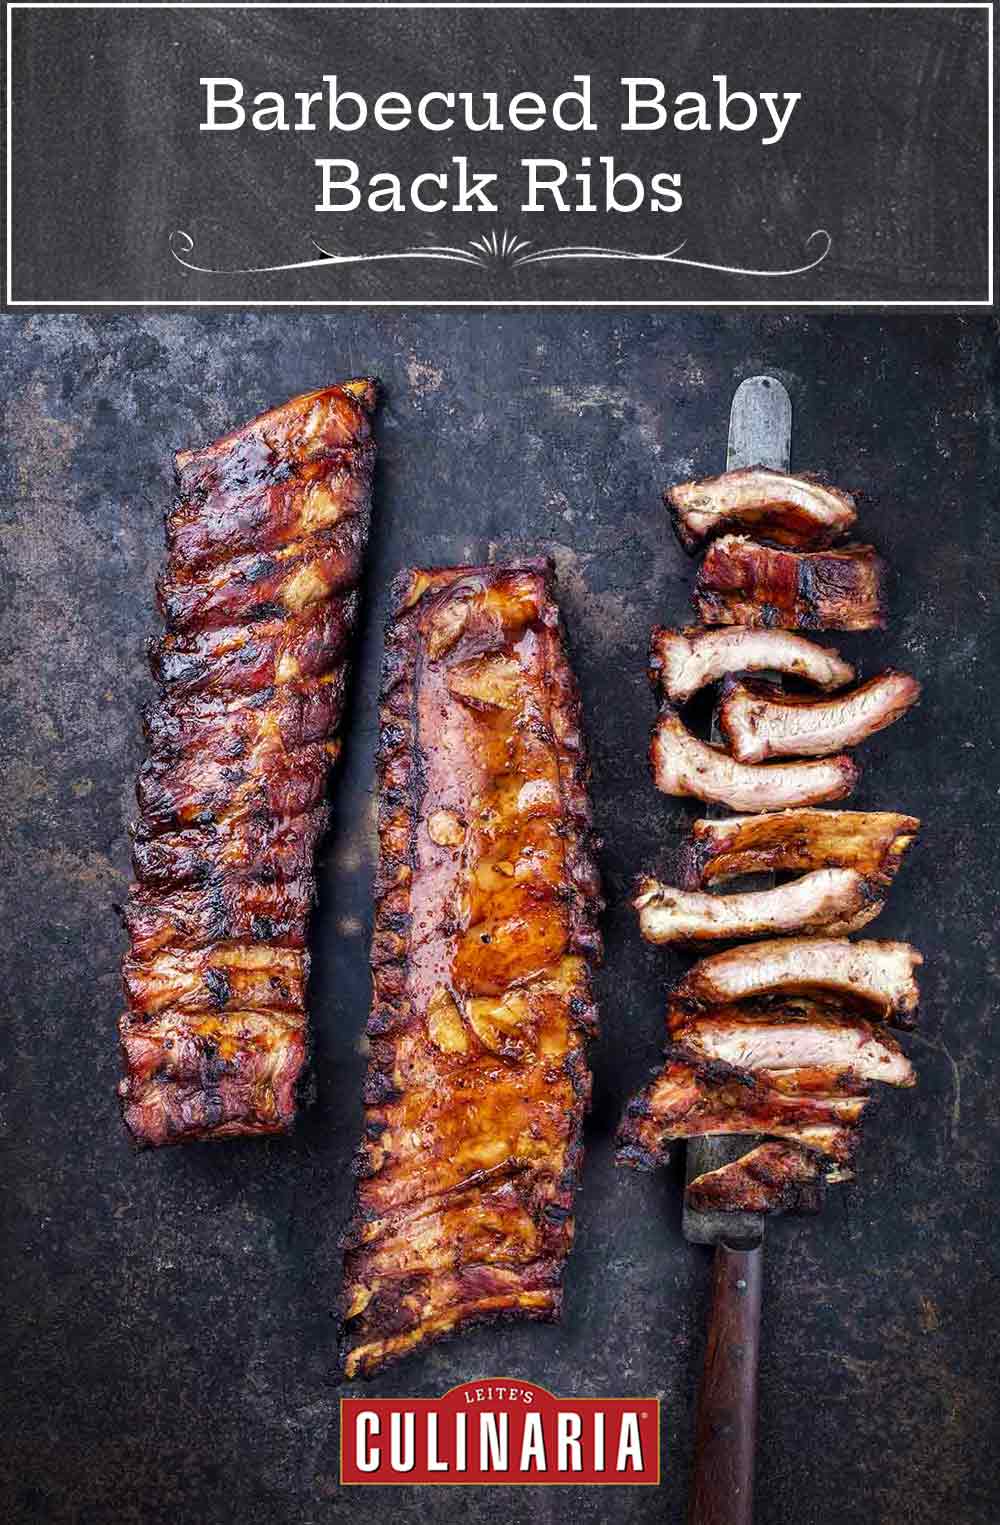 Two racks of barbecued baby back ribs, and a third rack cut into individual ribs, resting on a knife.